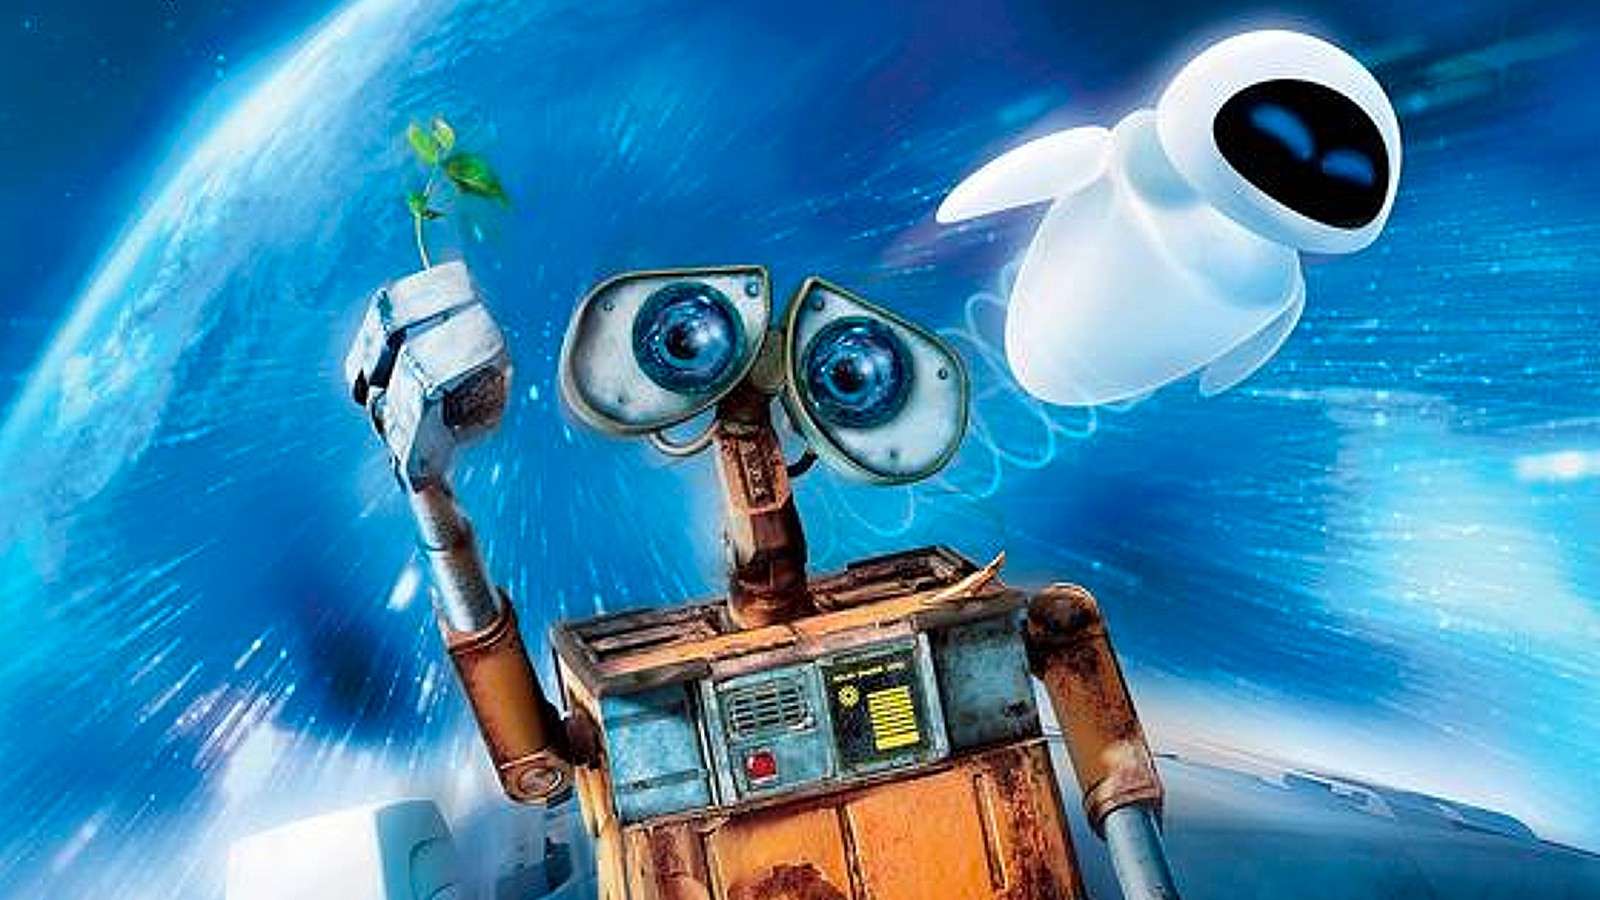 The poster for WALL-E